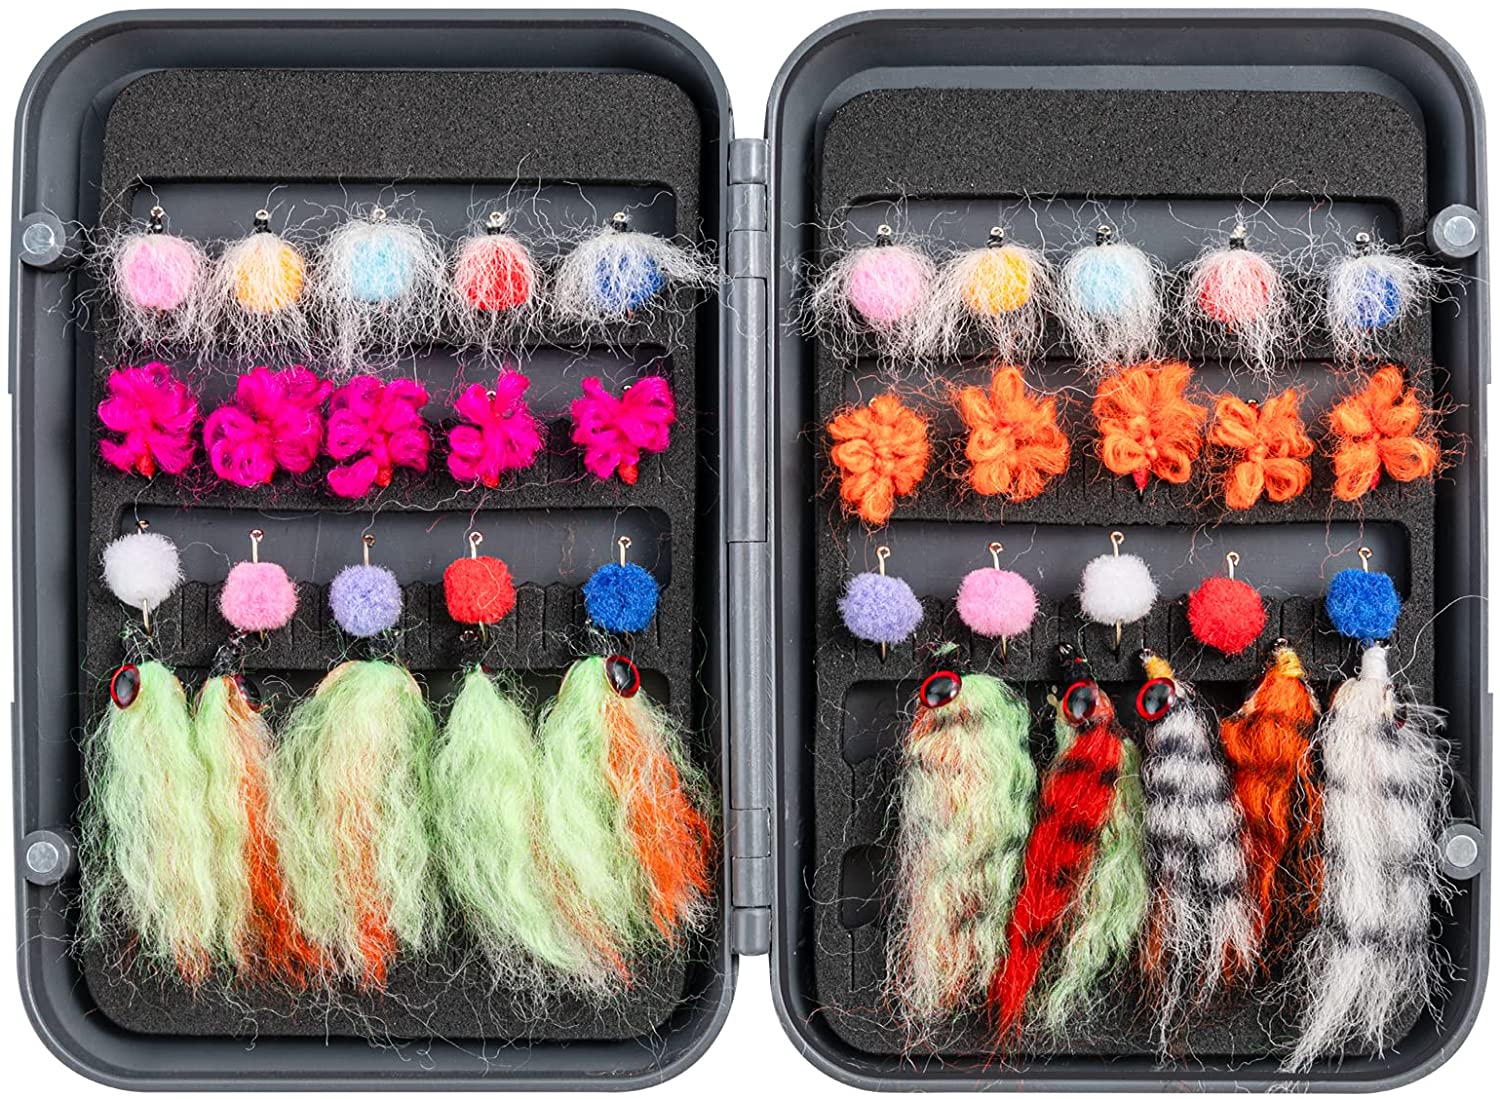 Pro Angler's Ultimate Fly Fishing Flies Kit - Premium Hand-Tied Lures for Trout, Bass, Salmon, and More